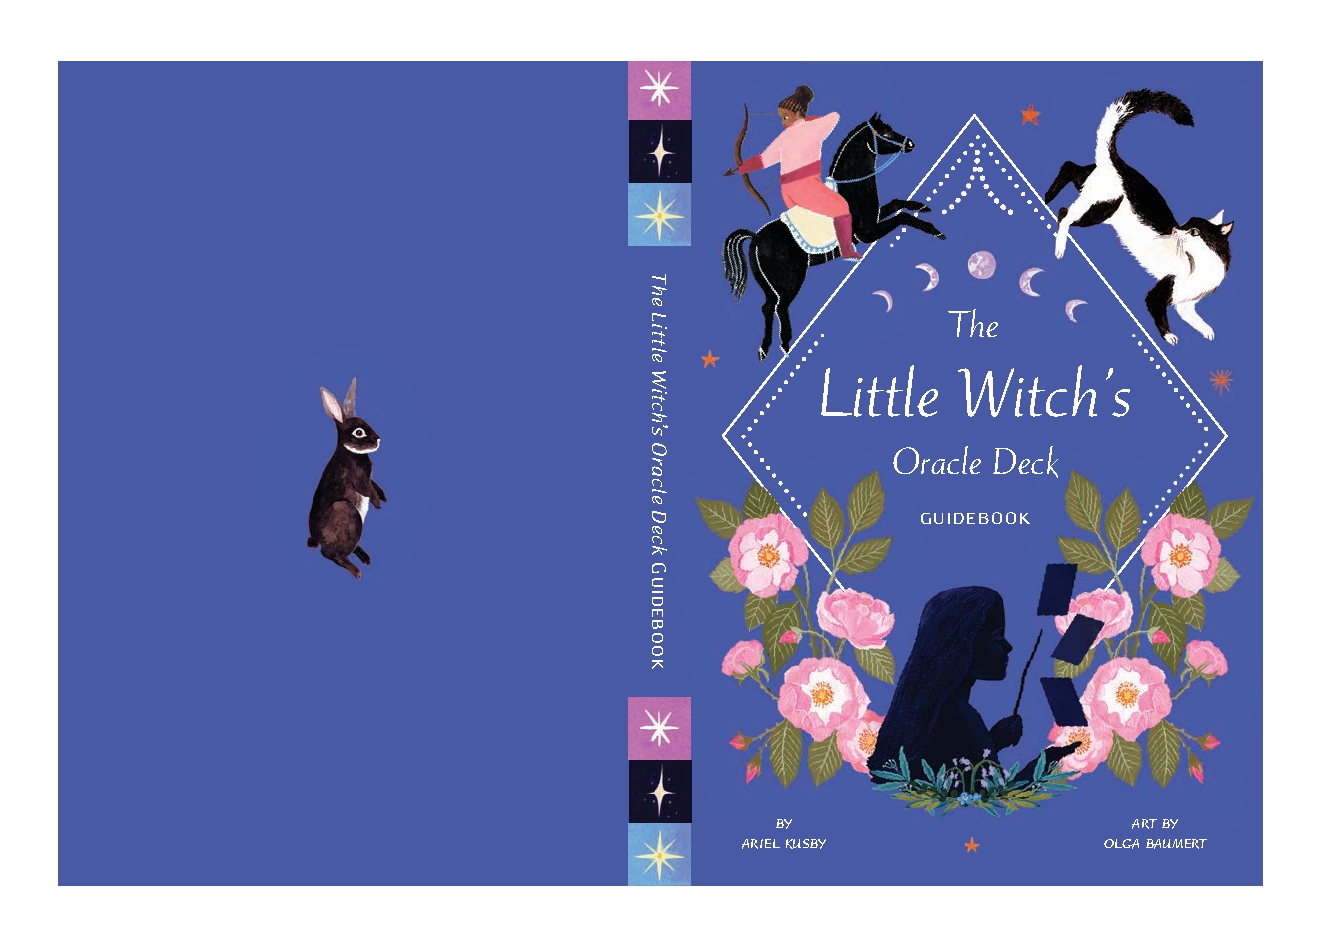 The Little Witch's Oracle Deck